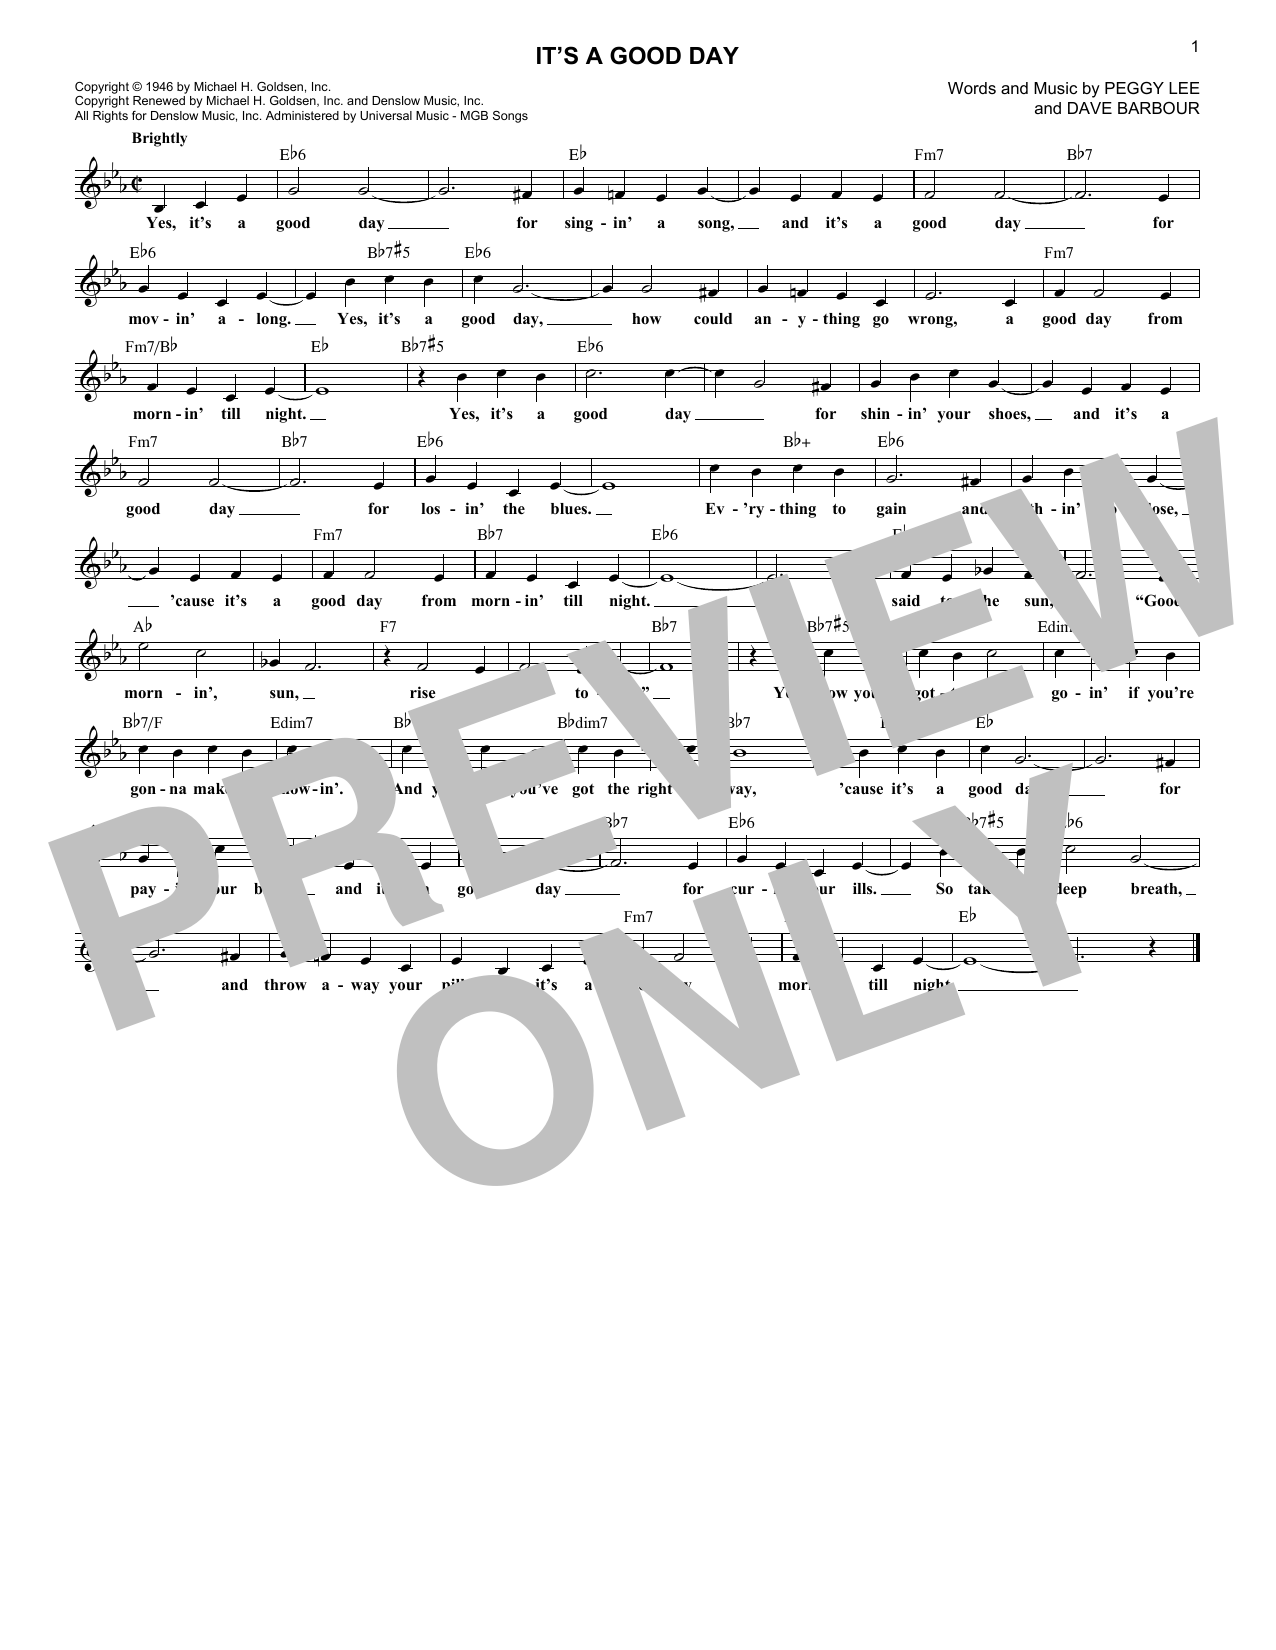 Download Peggy Lee It's A Good Day Sheet Music